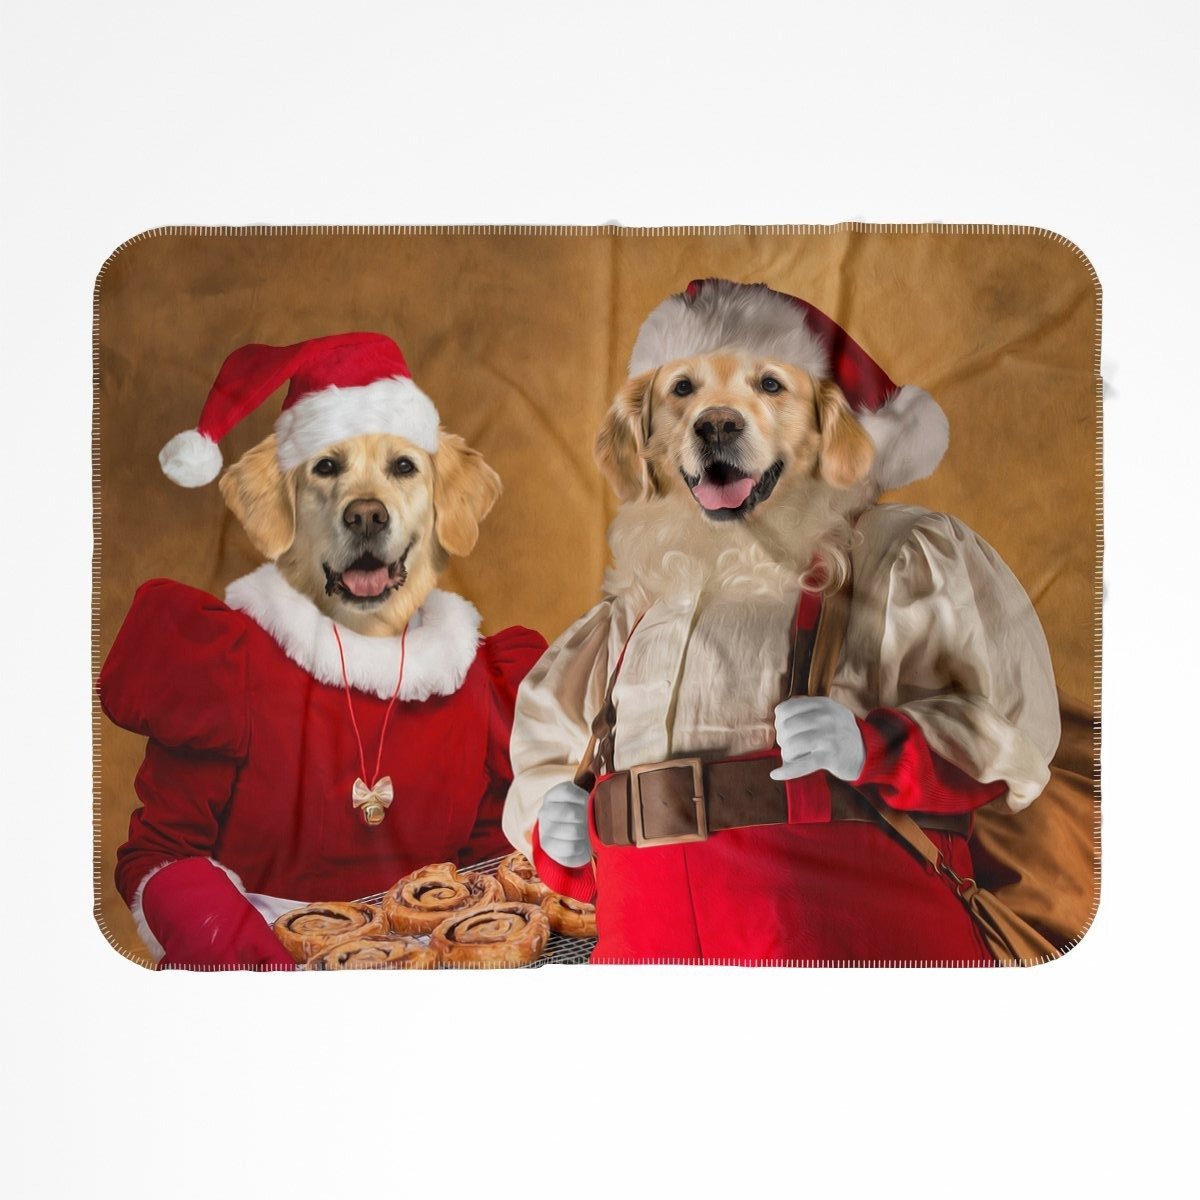 Mr & Mrs Claus: Custom Pet Blanket - Paw & Glory - #pet portraits# - #dog portraits# - #pet portraits uk#Paw and glory, Pet portraits blanket,christmas blankets for dogs, your dog on a blanket, dog printed on blanket, custom dog blankets personalized, animal on blanket